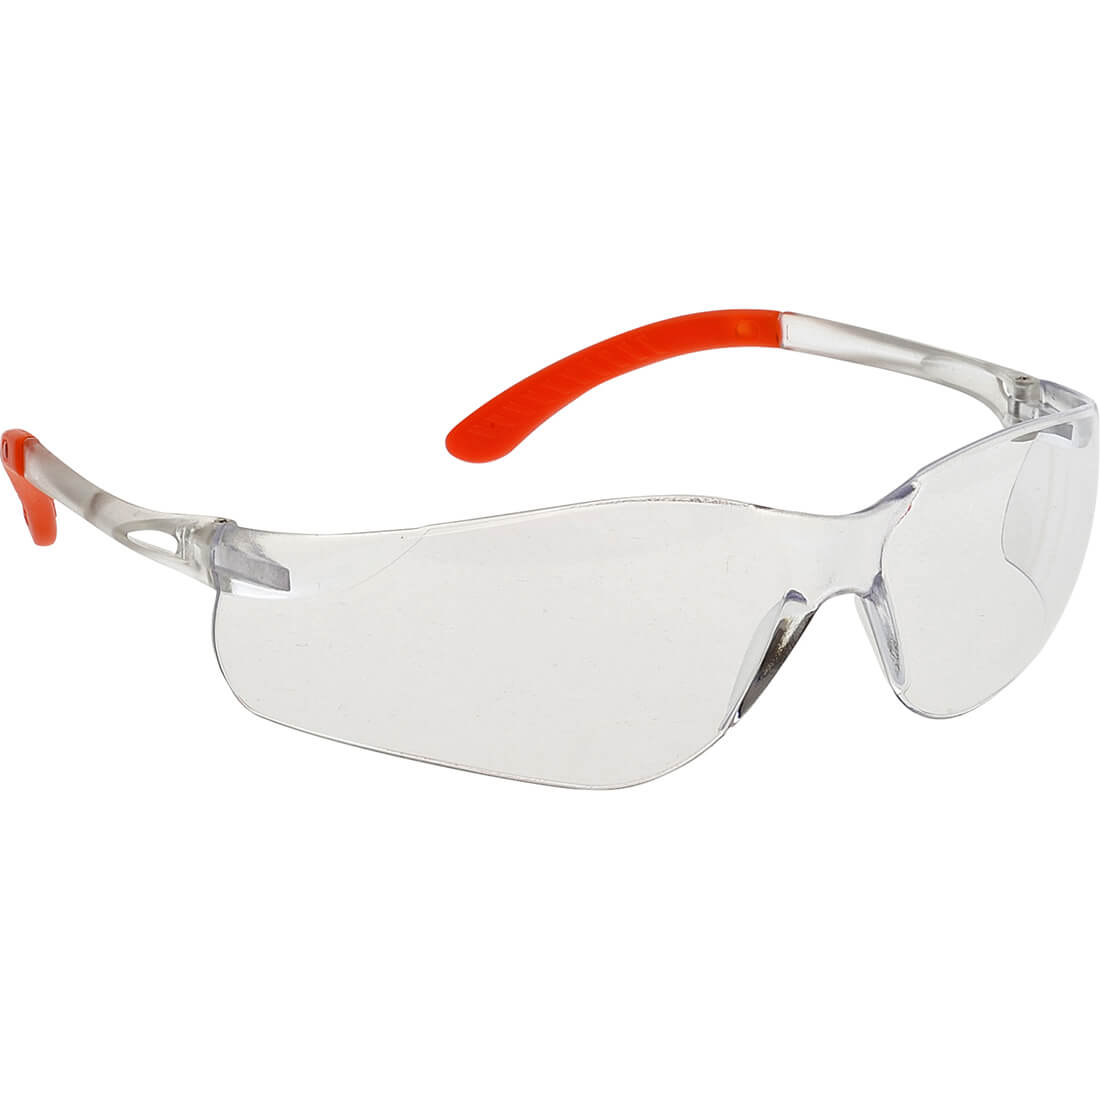 Image of Portwest Pan View Safety Glasses Orange Clear